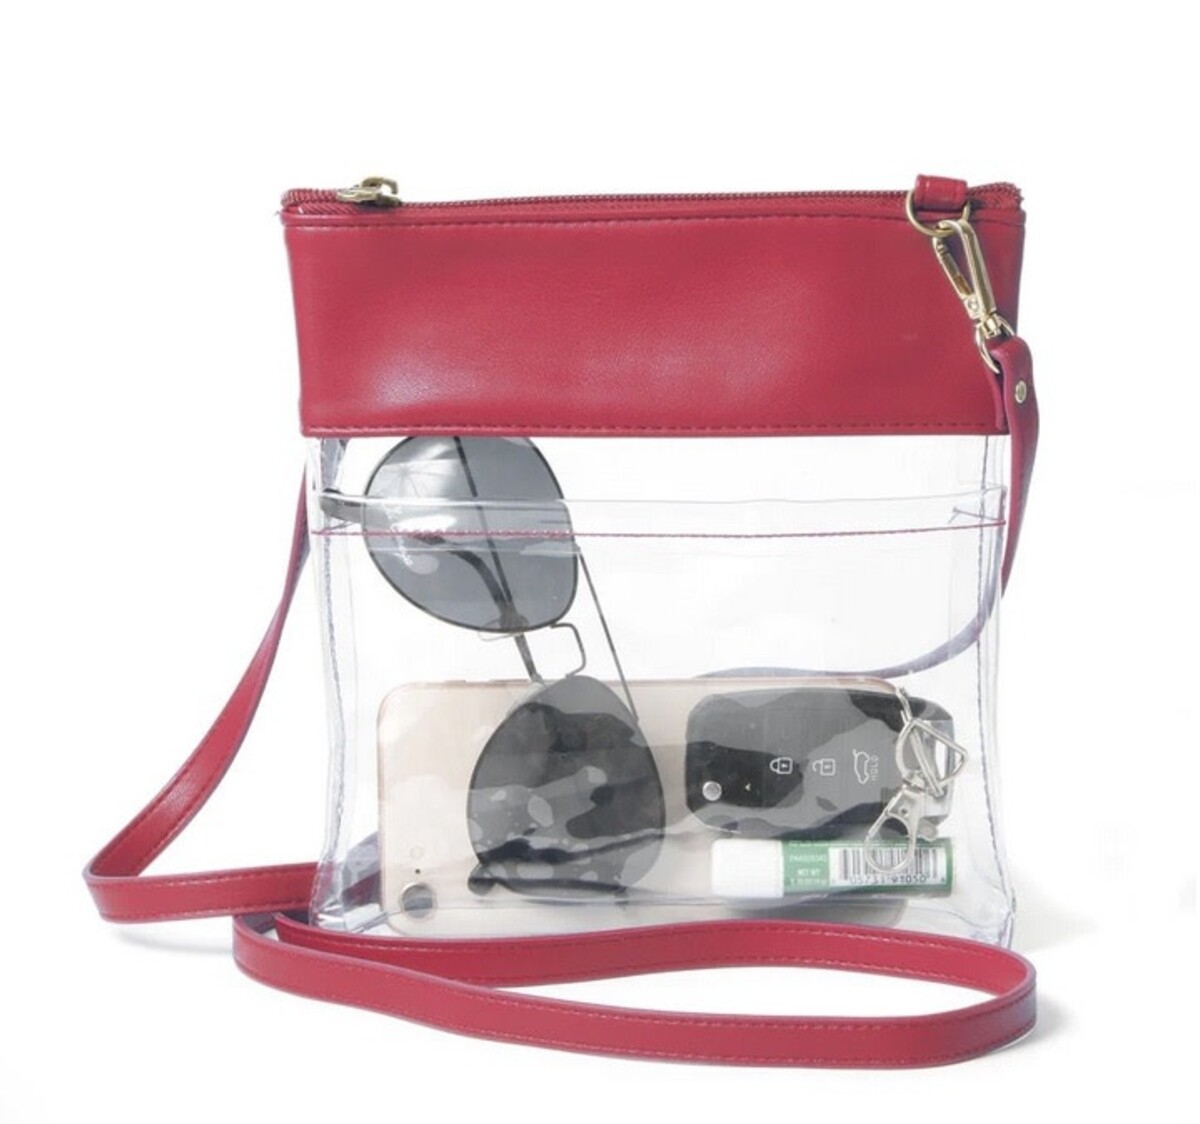 Desden Gameday Crossbody Clear Purse With Vegan Leather Trim and